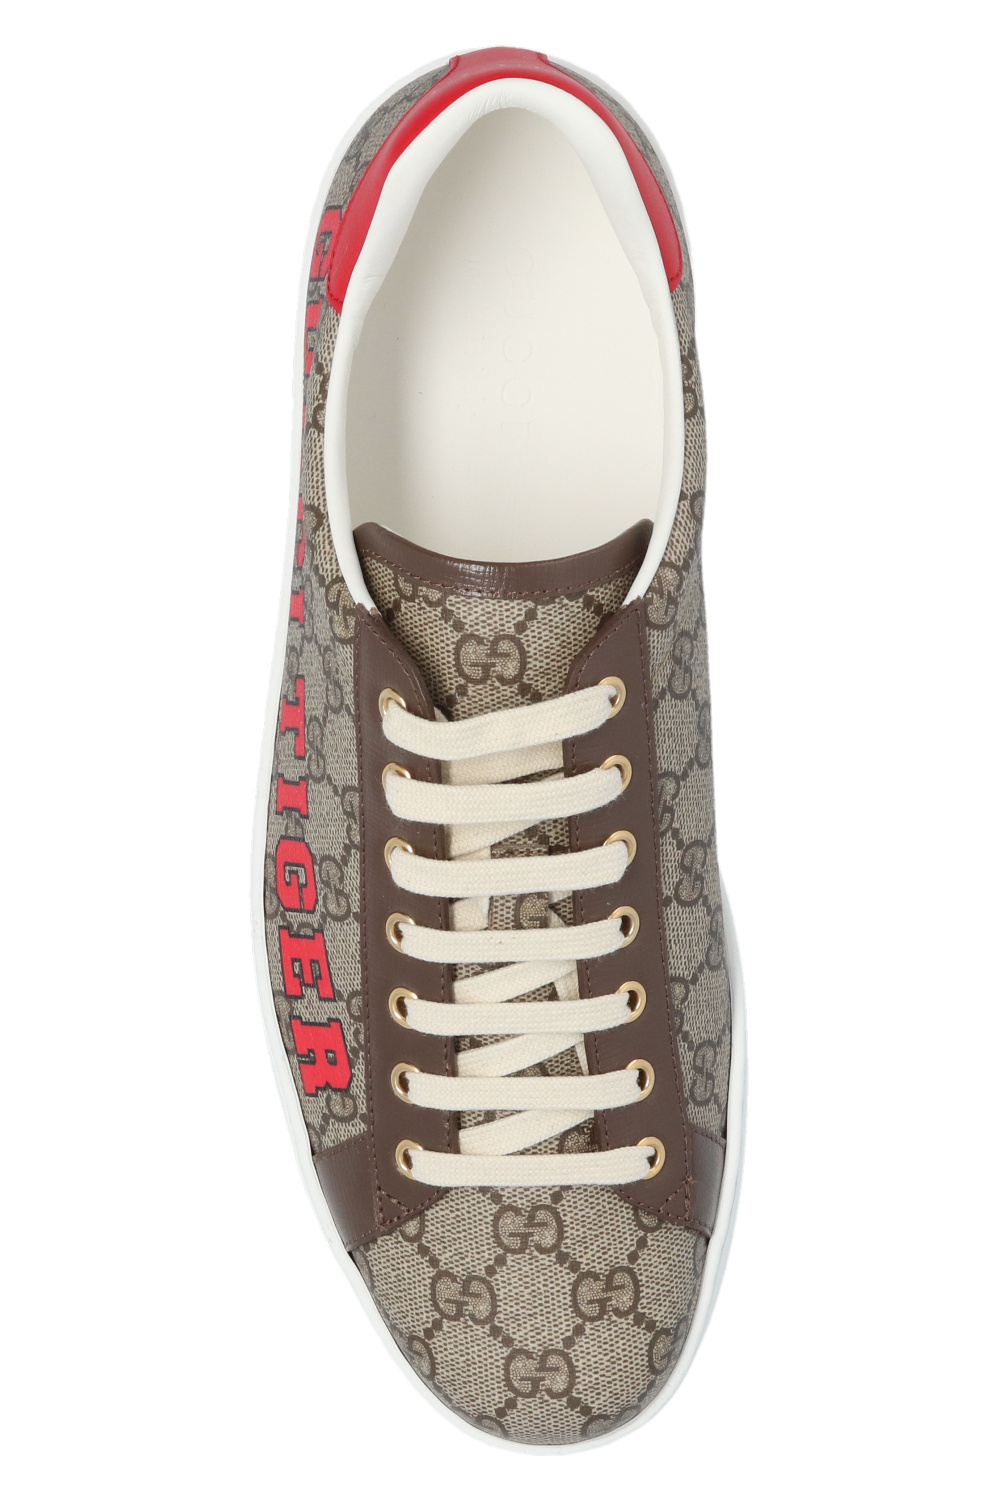 Gucci Sneakers from the ‘Gucci Tiger’ collection